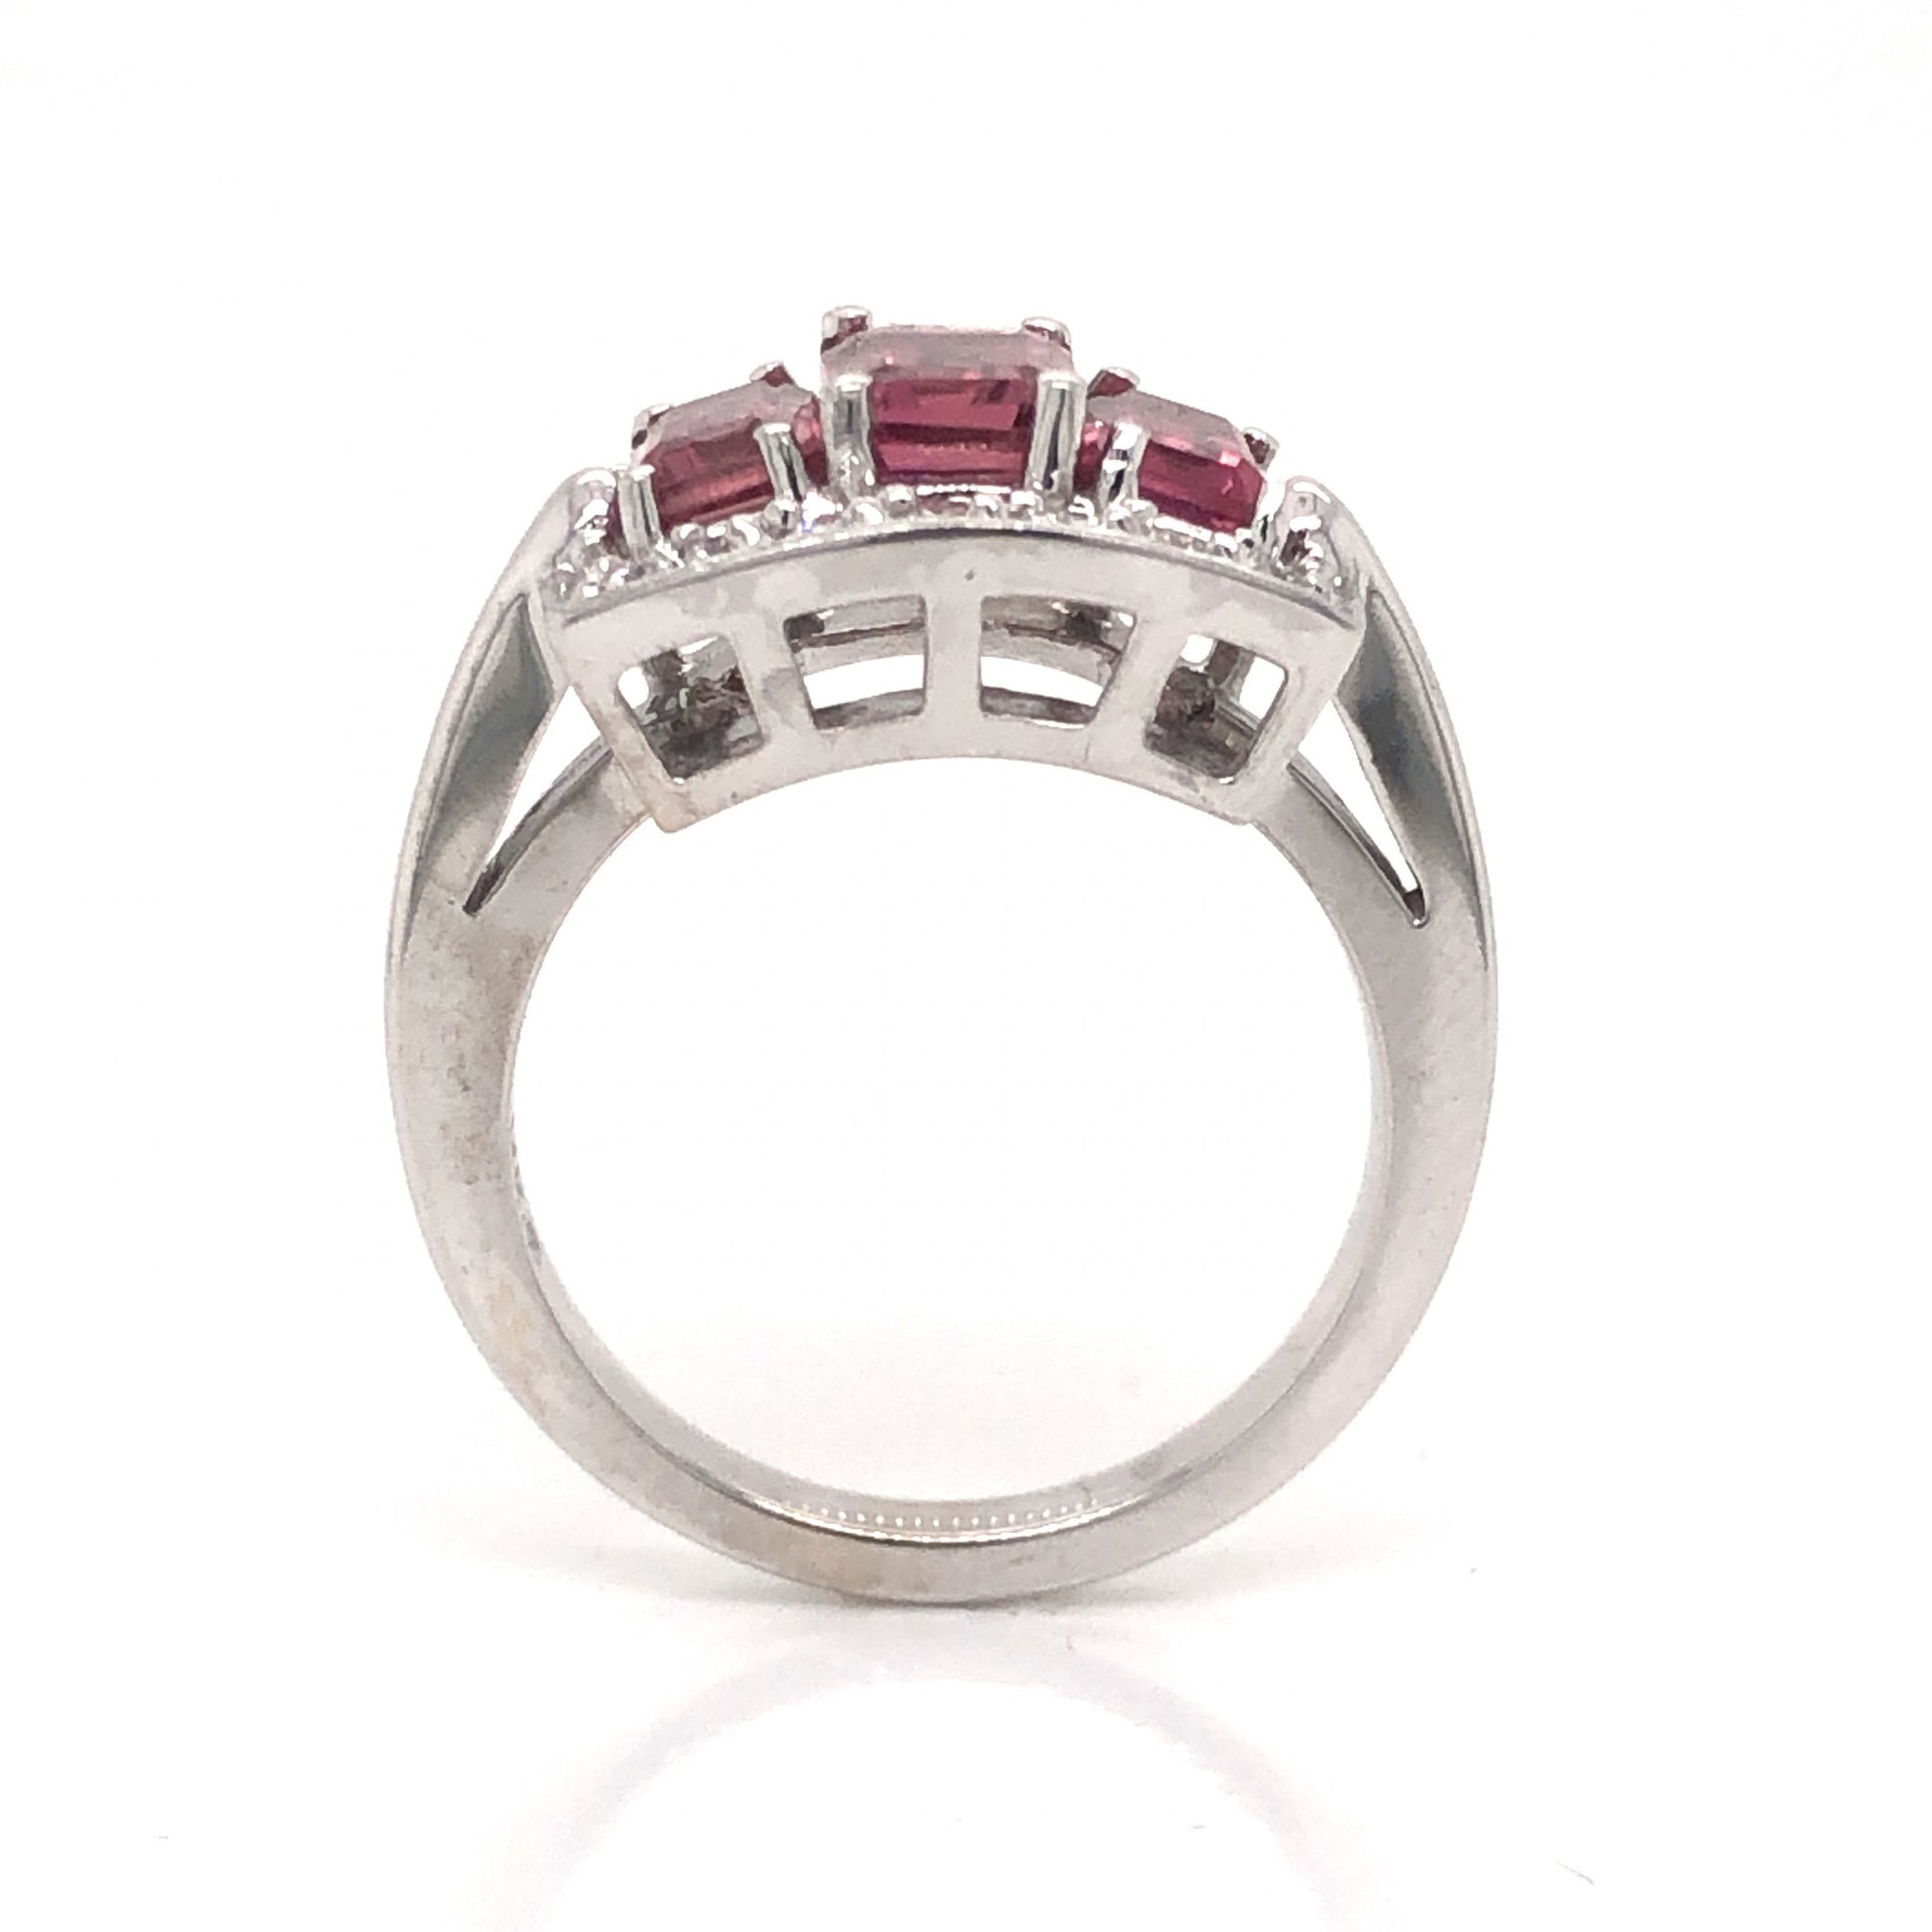 Pink Tourmaline & Diamond Cocktail Ring in 14k White GoldComposition: Platinum Ring Size: 7.25 Total Diamond Weight: .24ct Total Gram Weight: 8.4 g Inscription: 14k
      